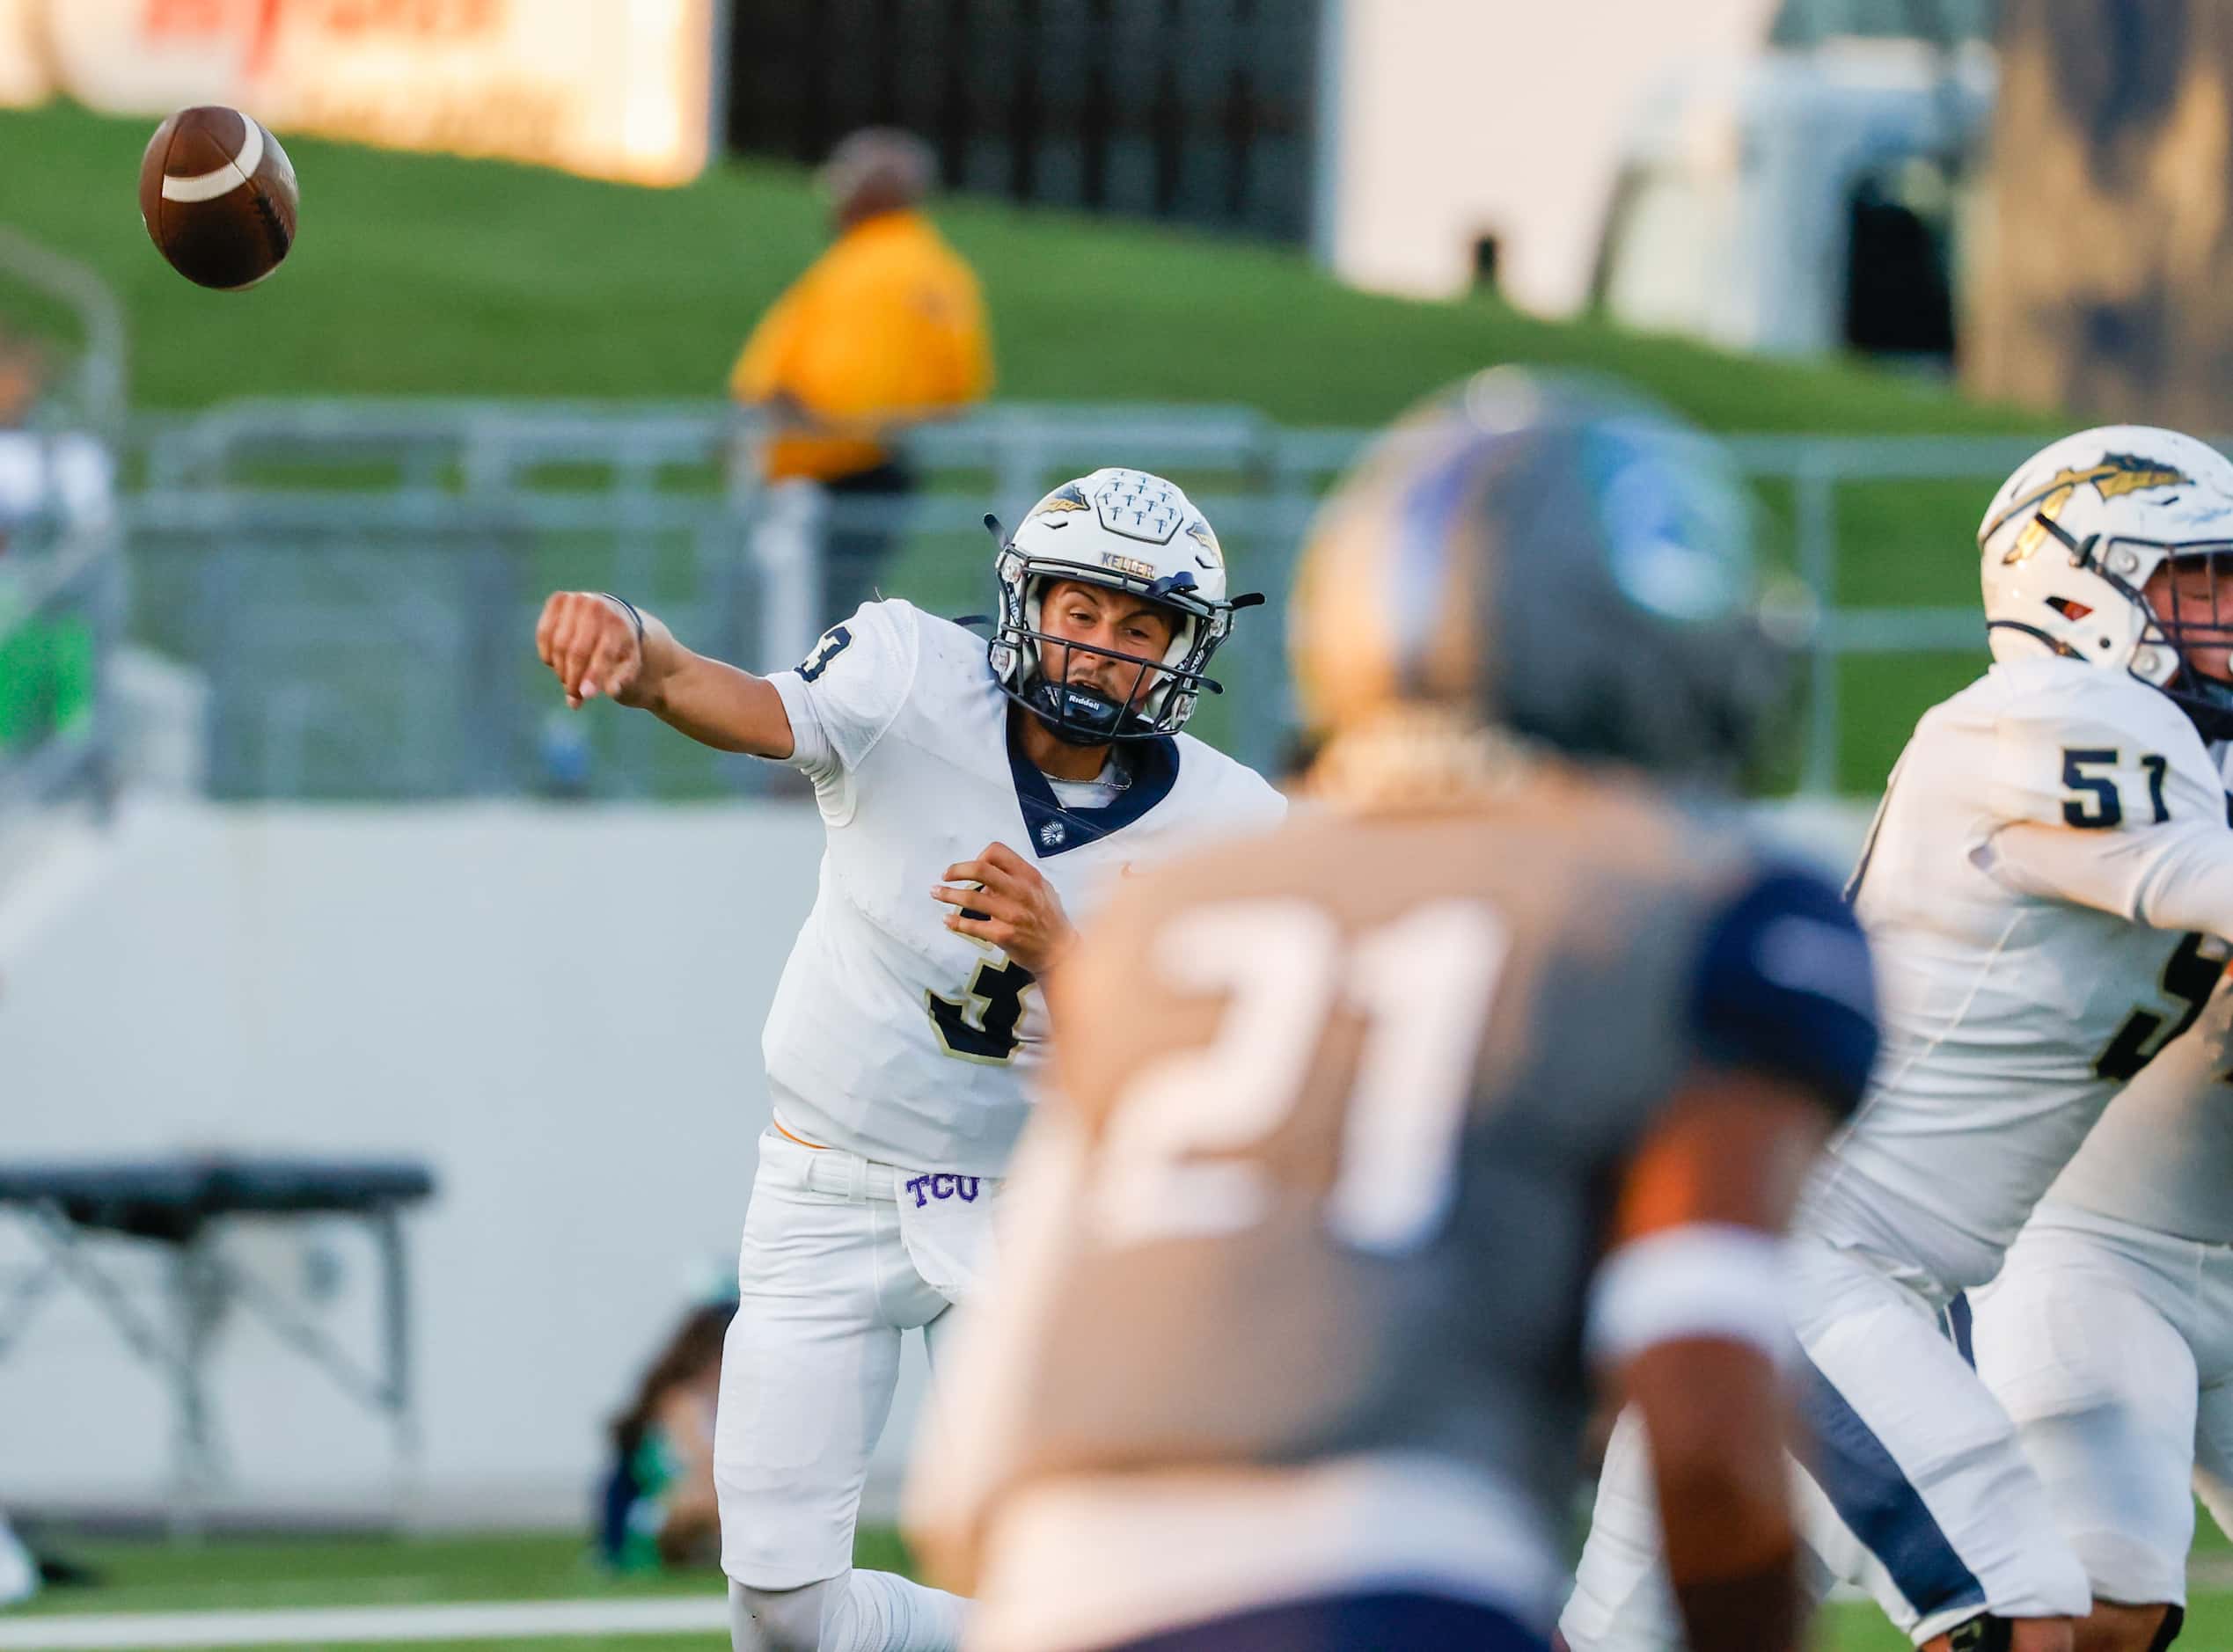 Keller High School quarterback Tre Guerra (3) releases a pass that is intercepted by V.R....